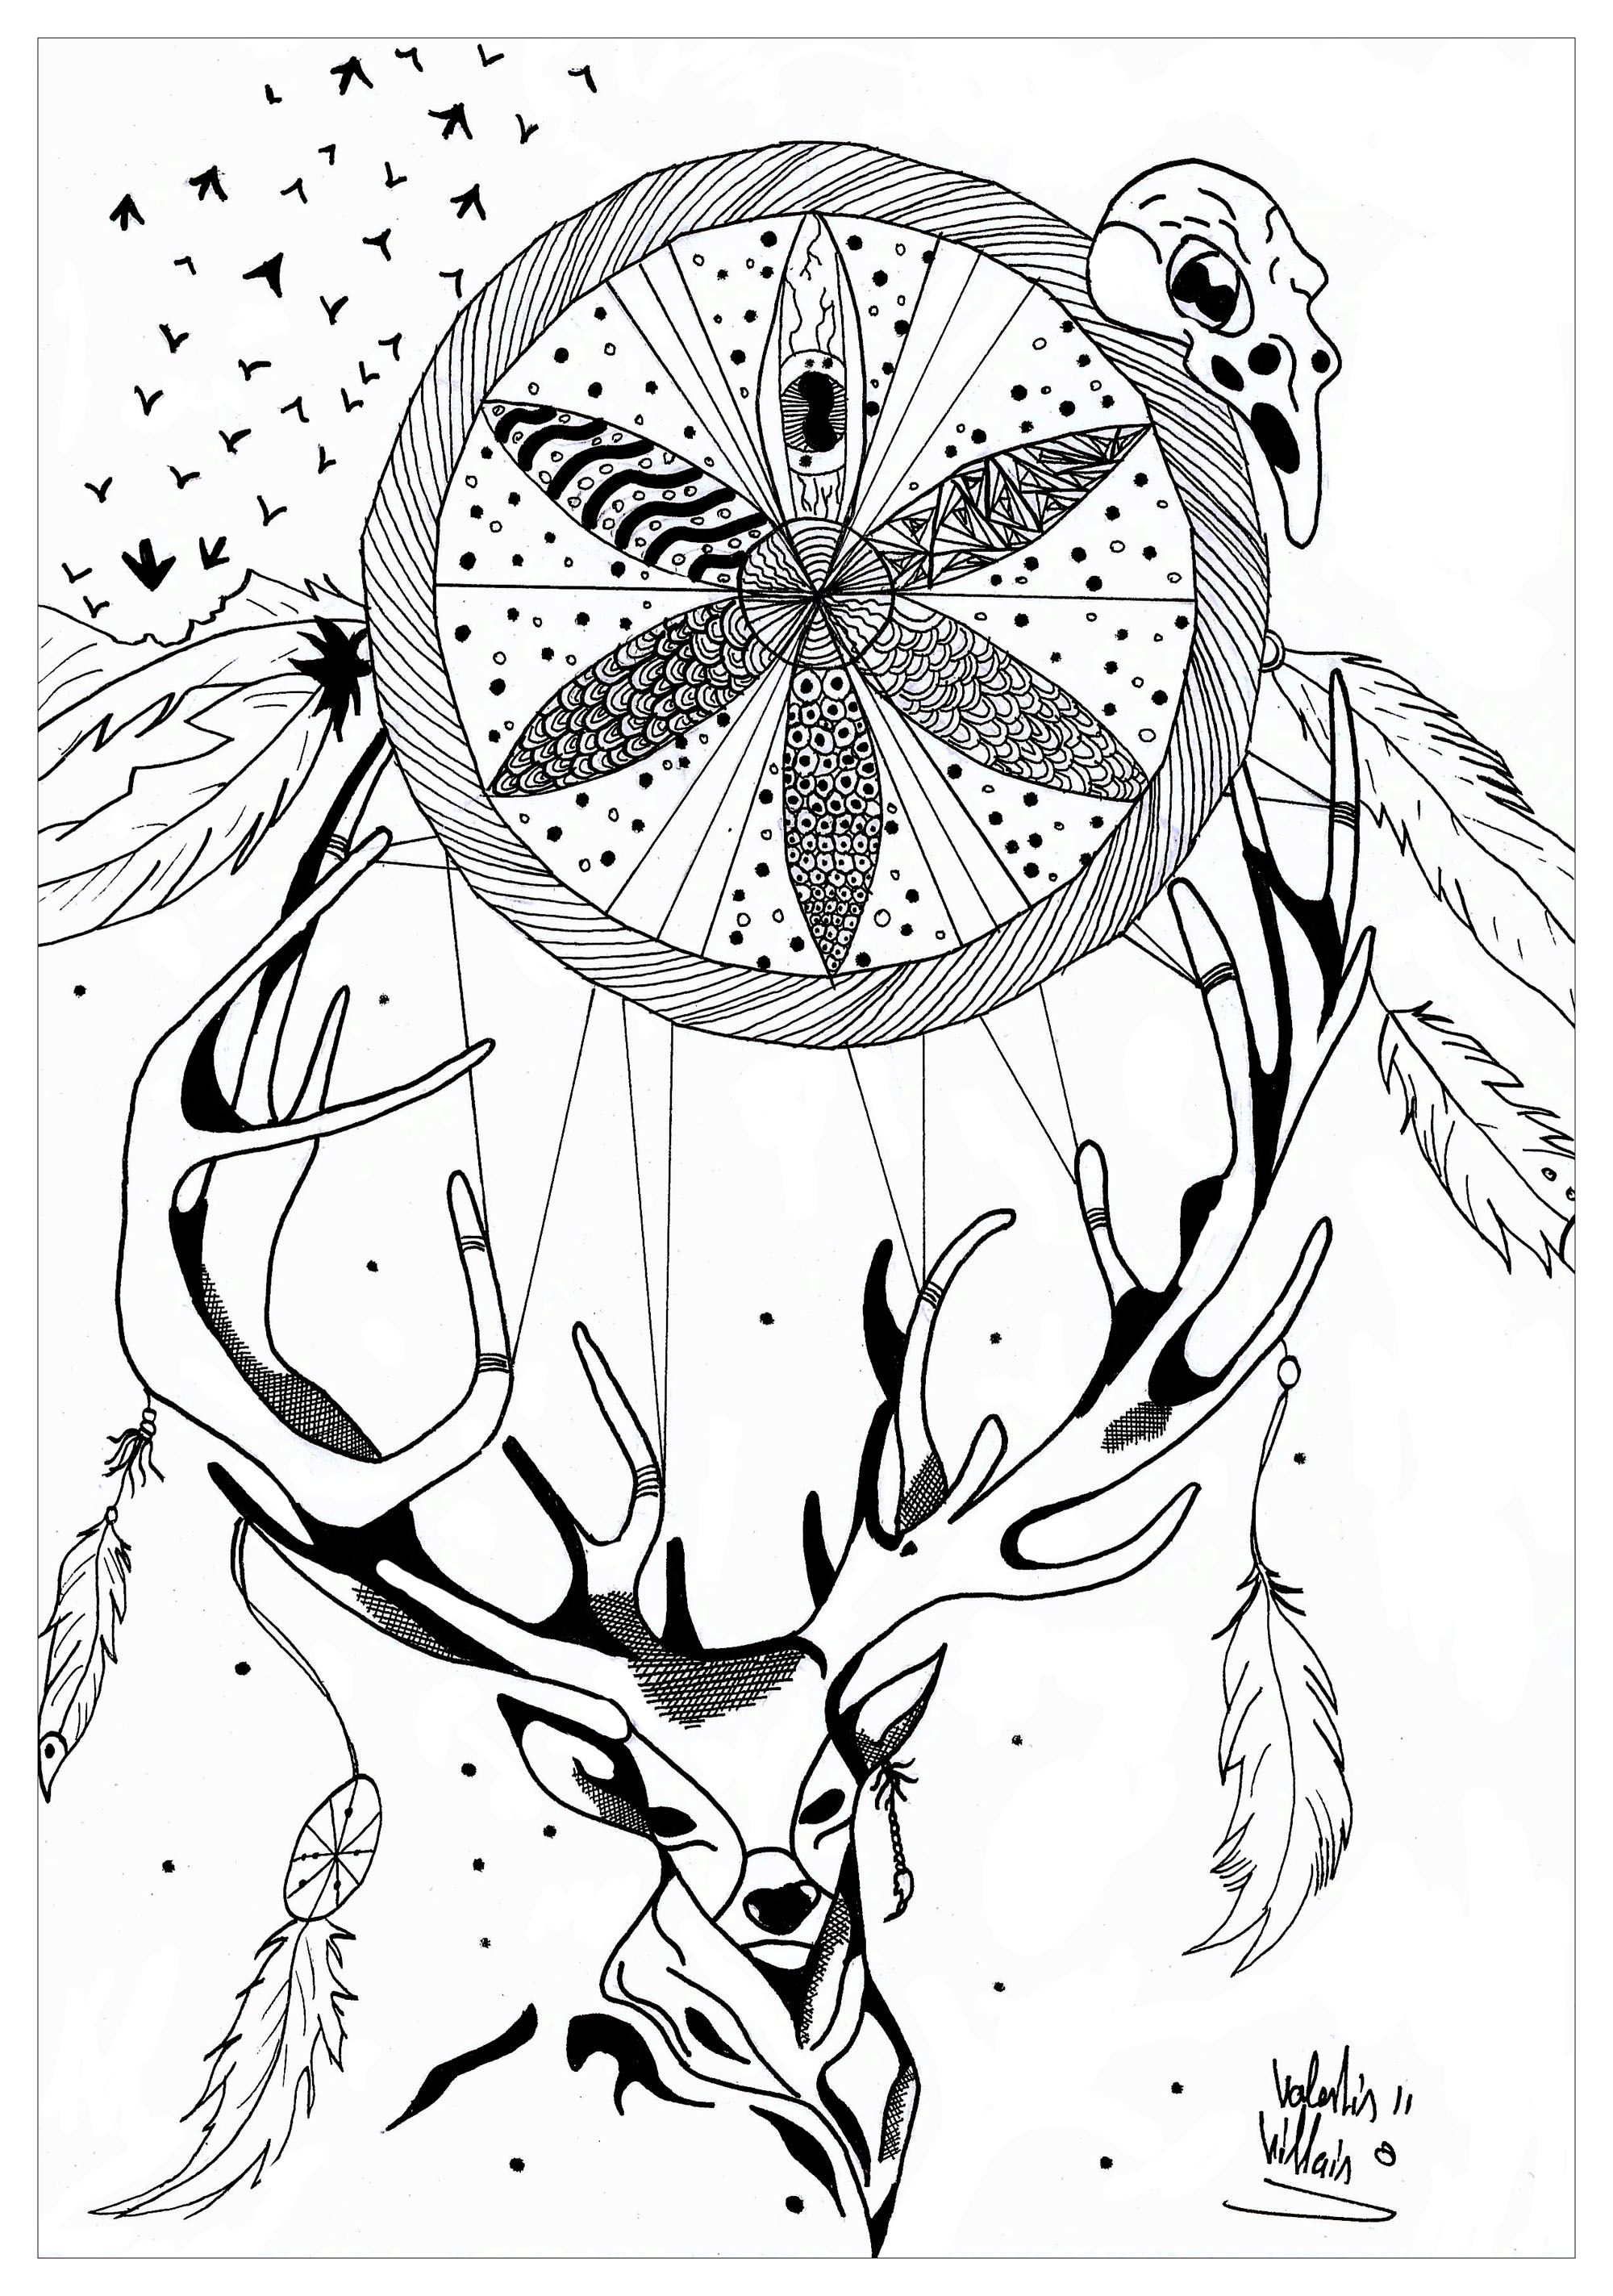 Coloring page of a deer with a dreamcatcher. This original drawing represents a deer with beautiful antlers, supporting an incredible dreamcatcher.